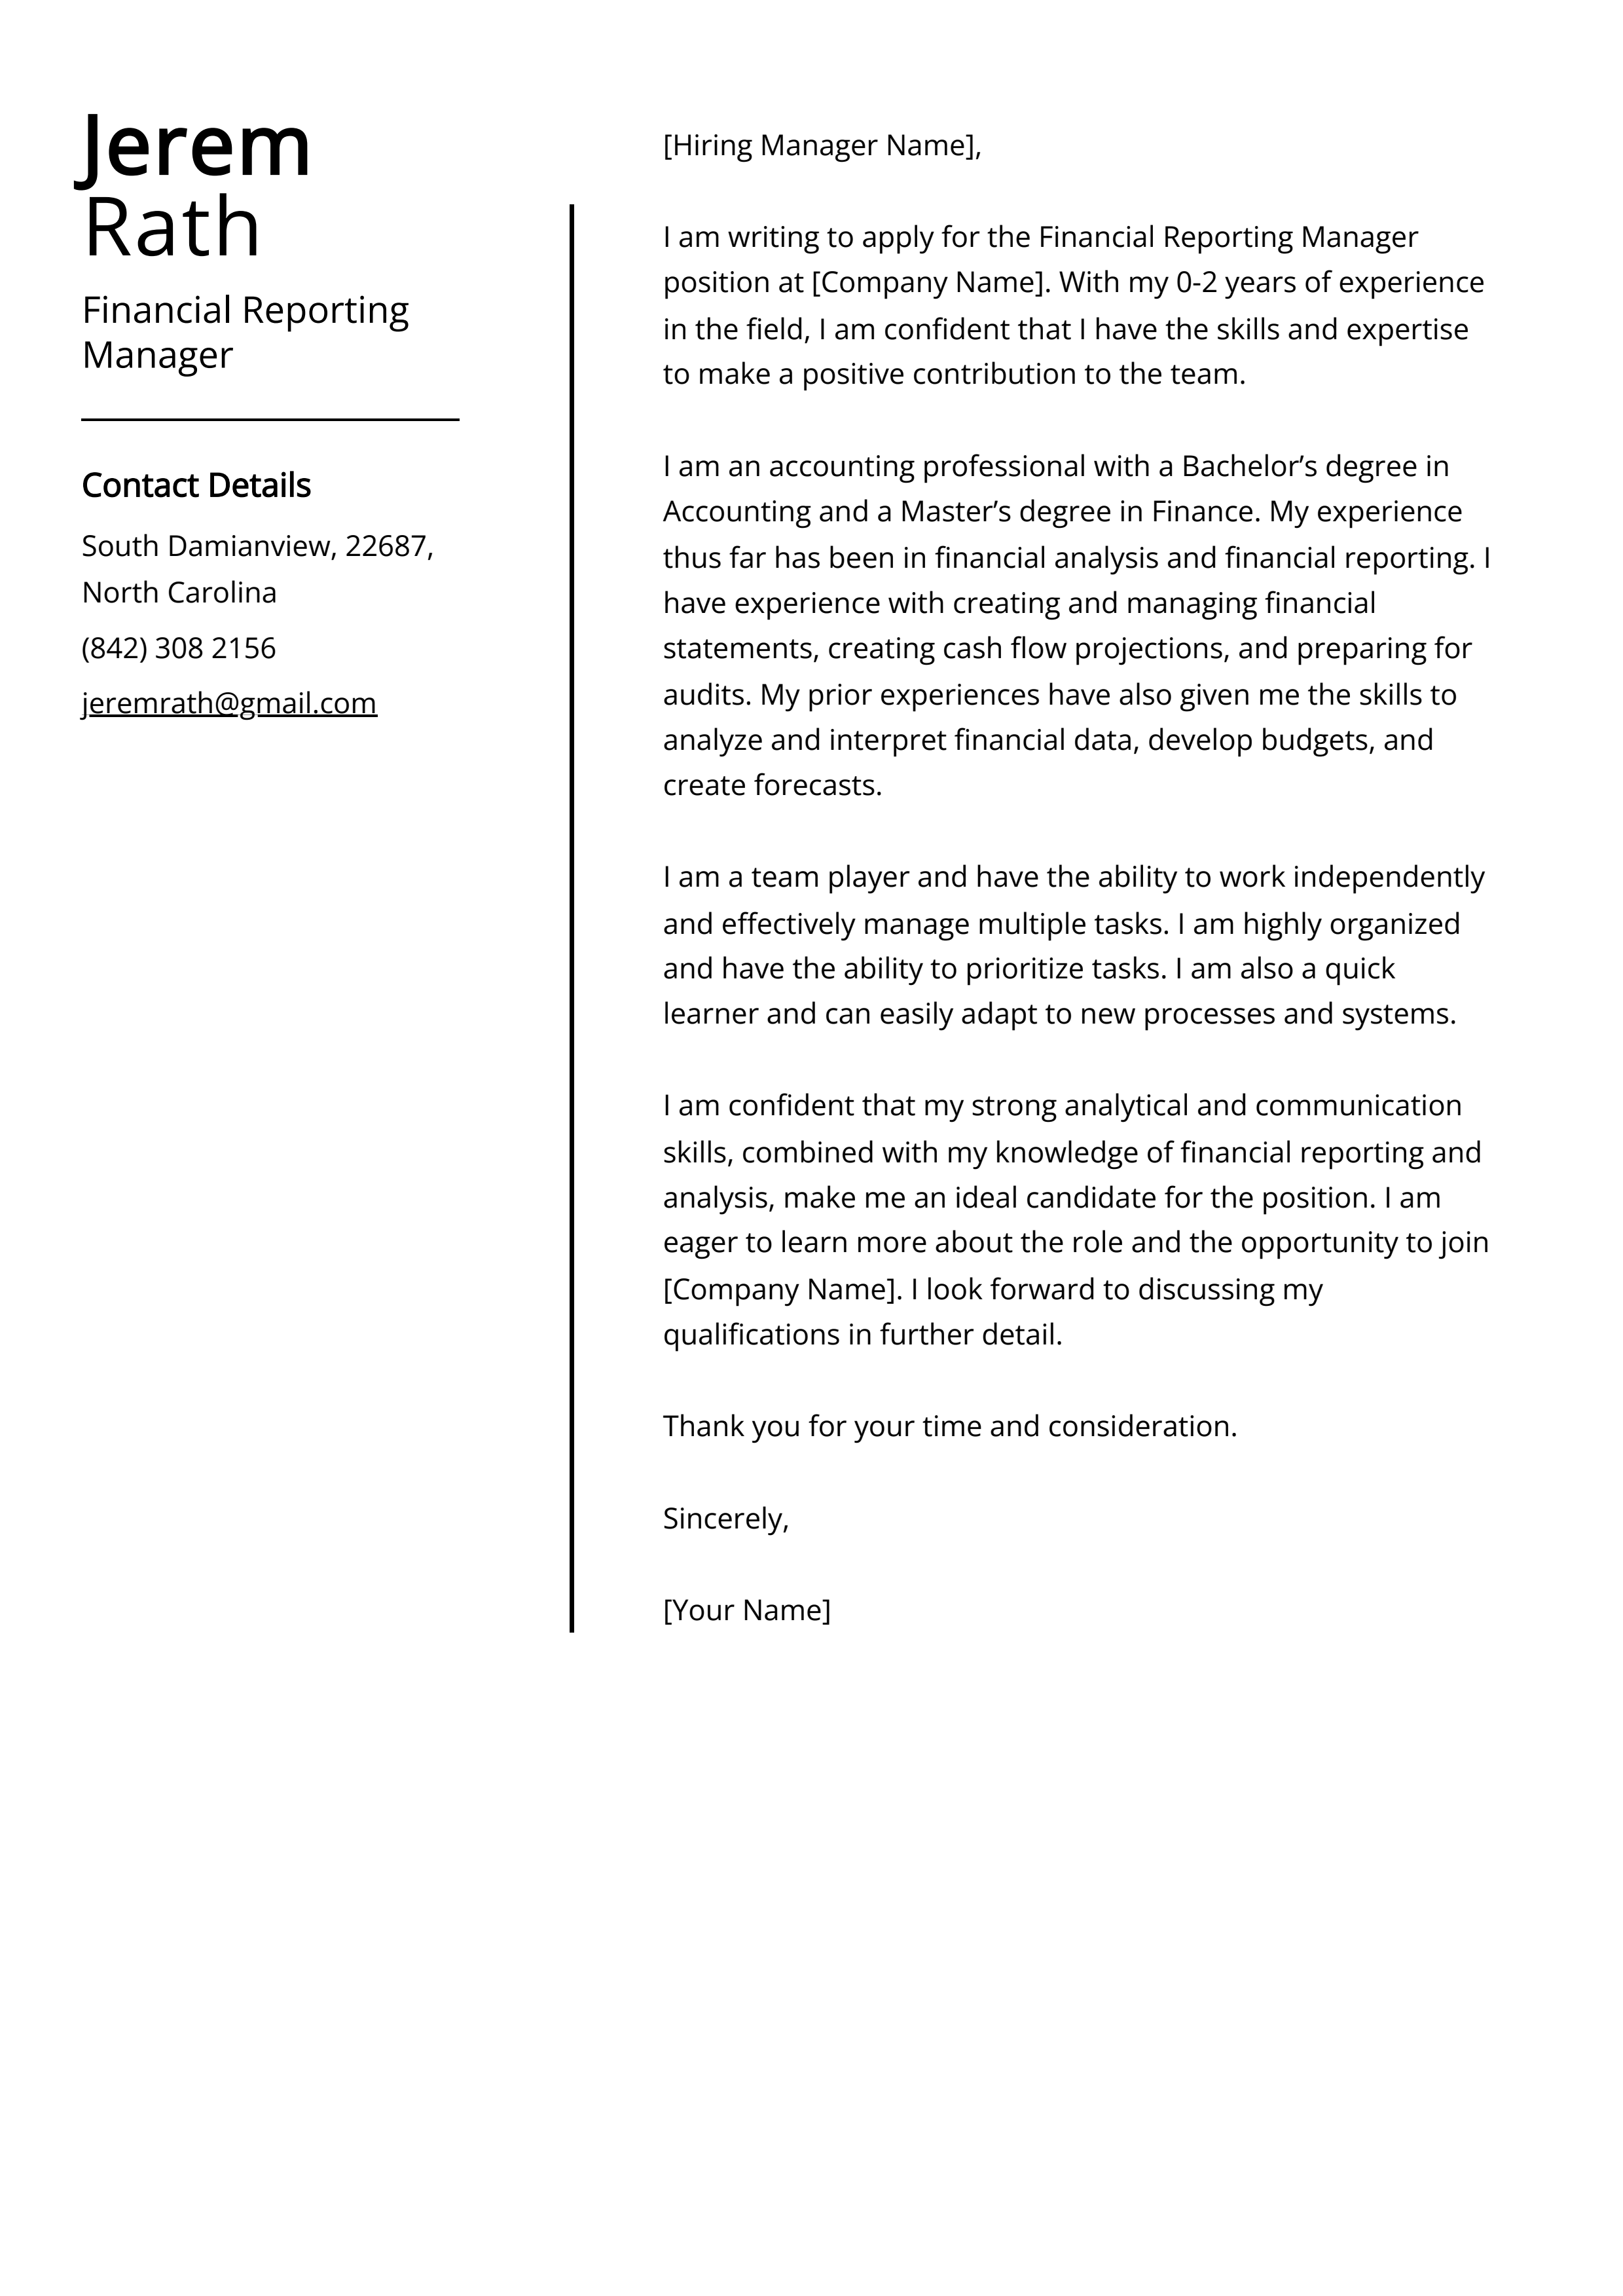 Financial Reporting Manager Cover Letter Example